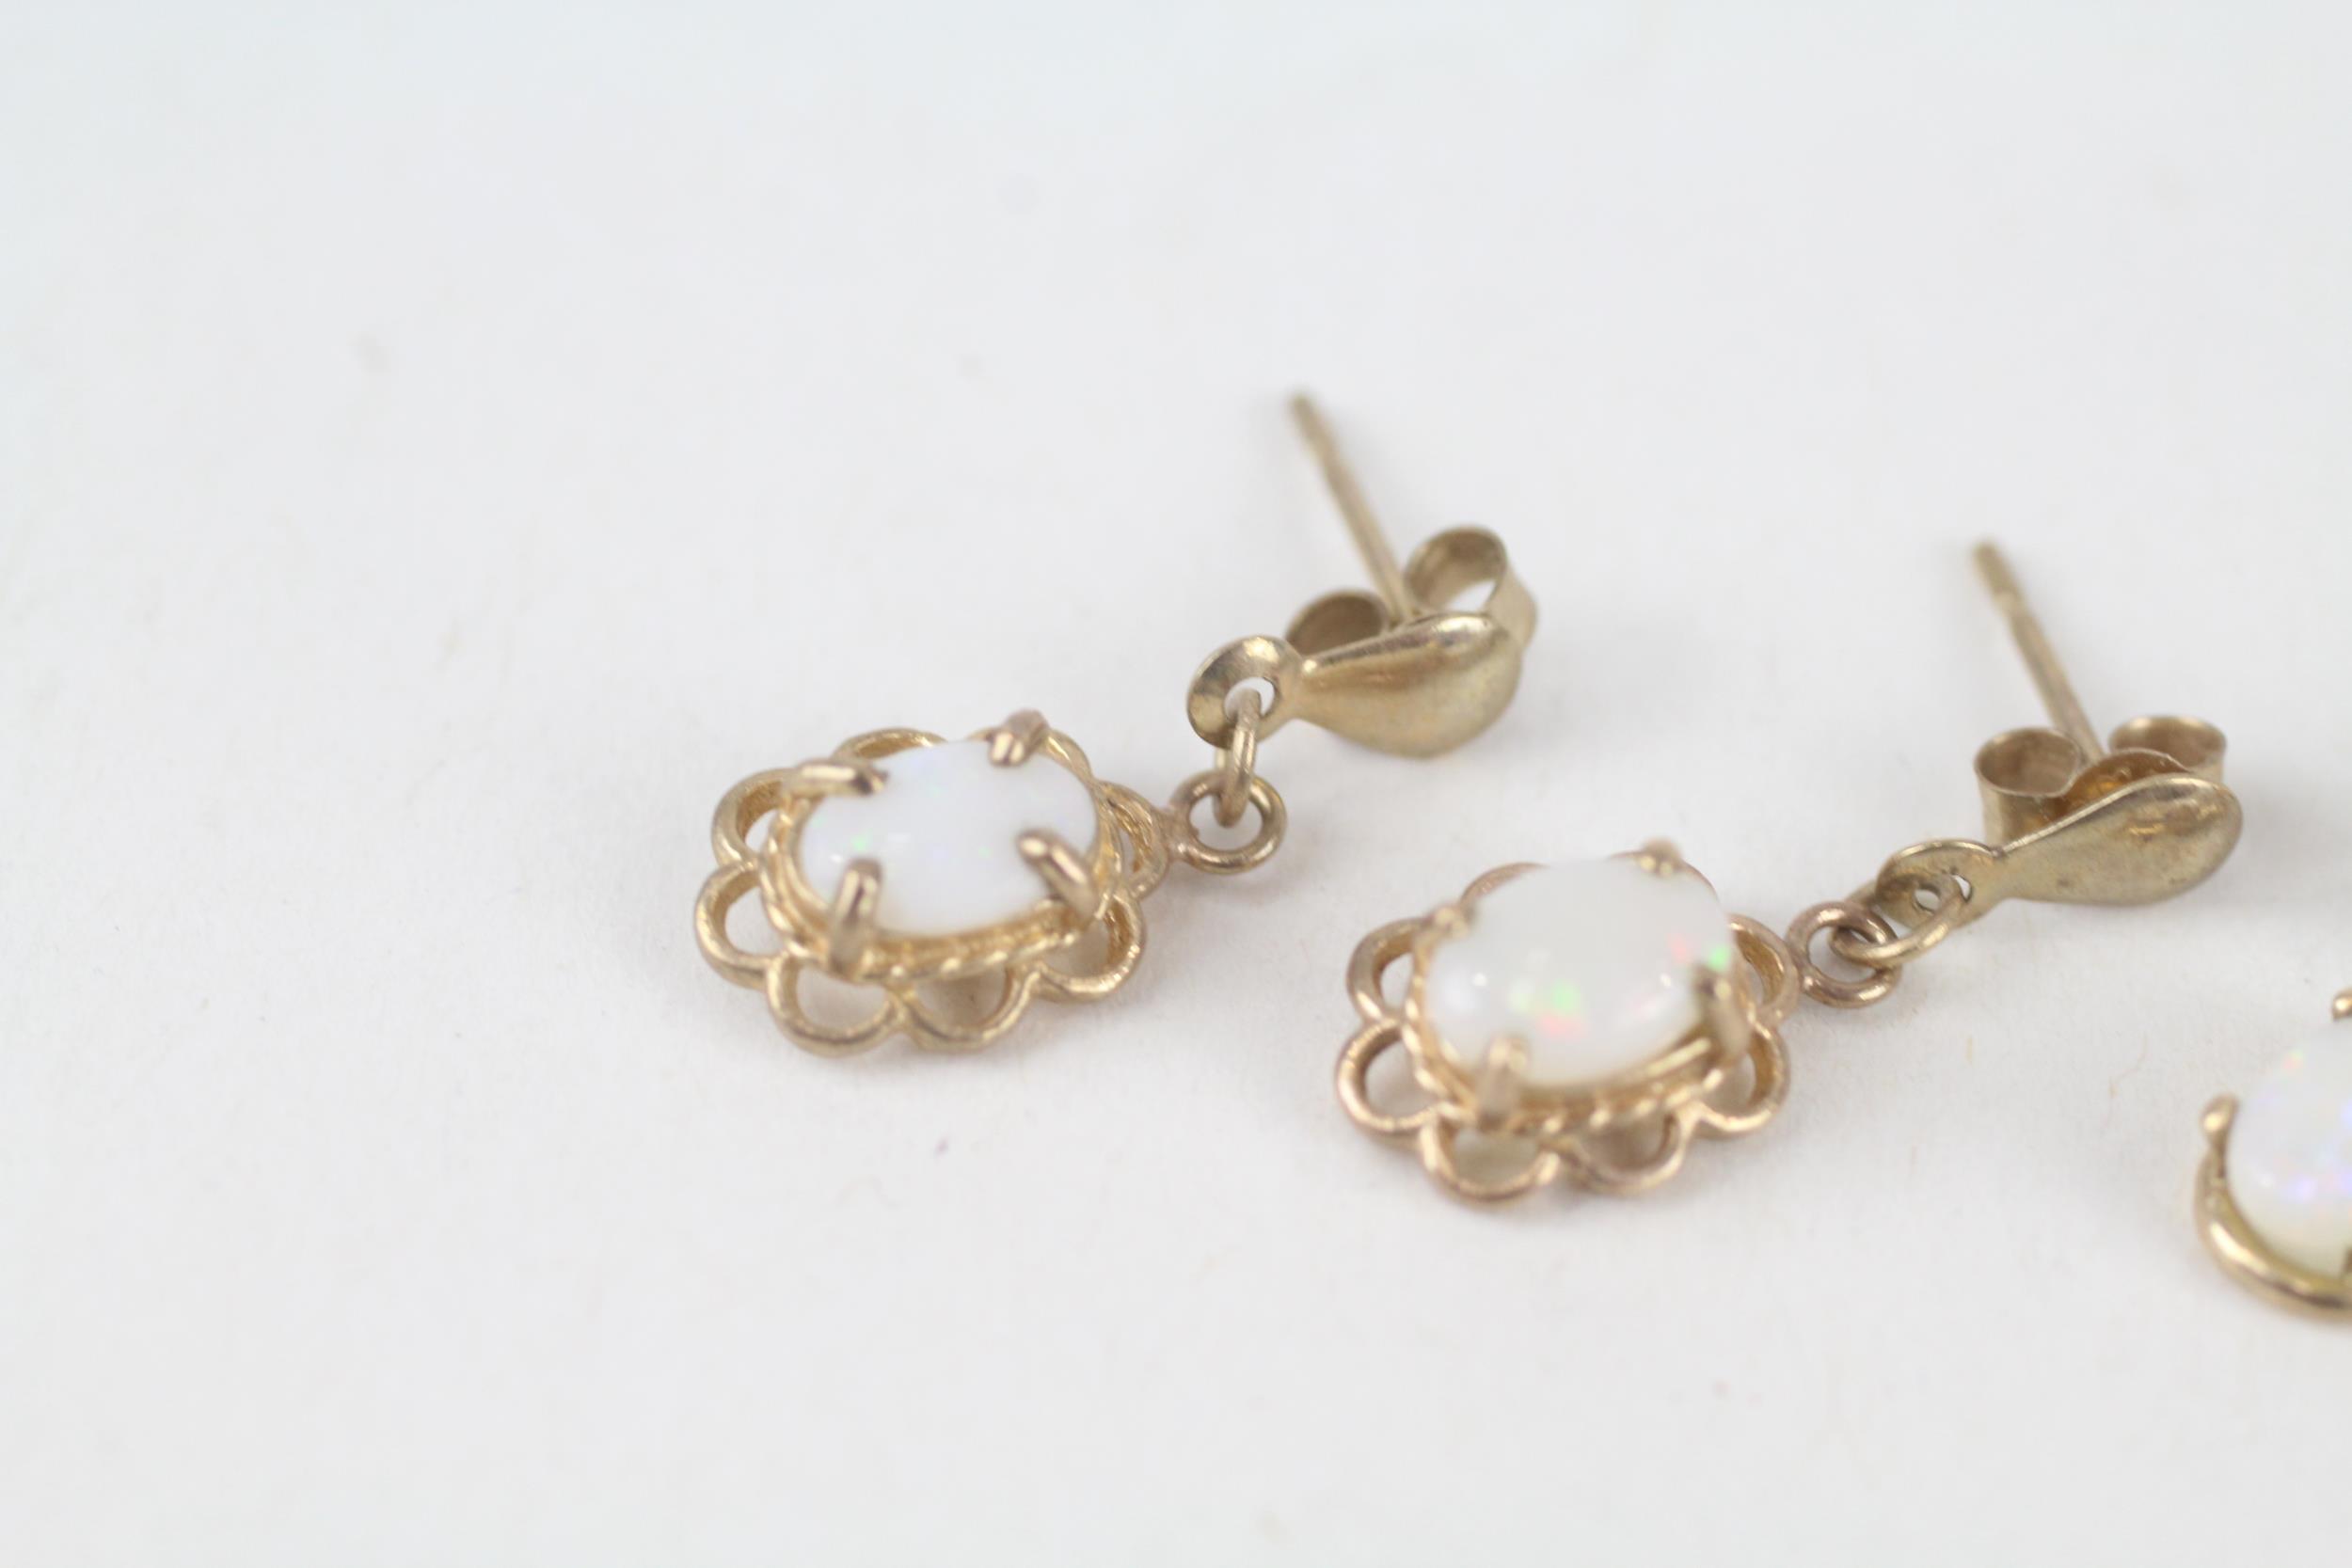 2x 9ct gold opal drop earrings with scroll backs 1.8 g - Image 2 of 5